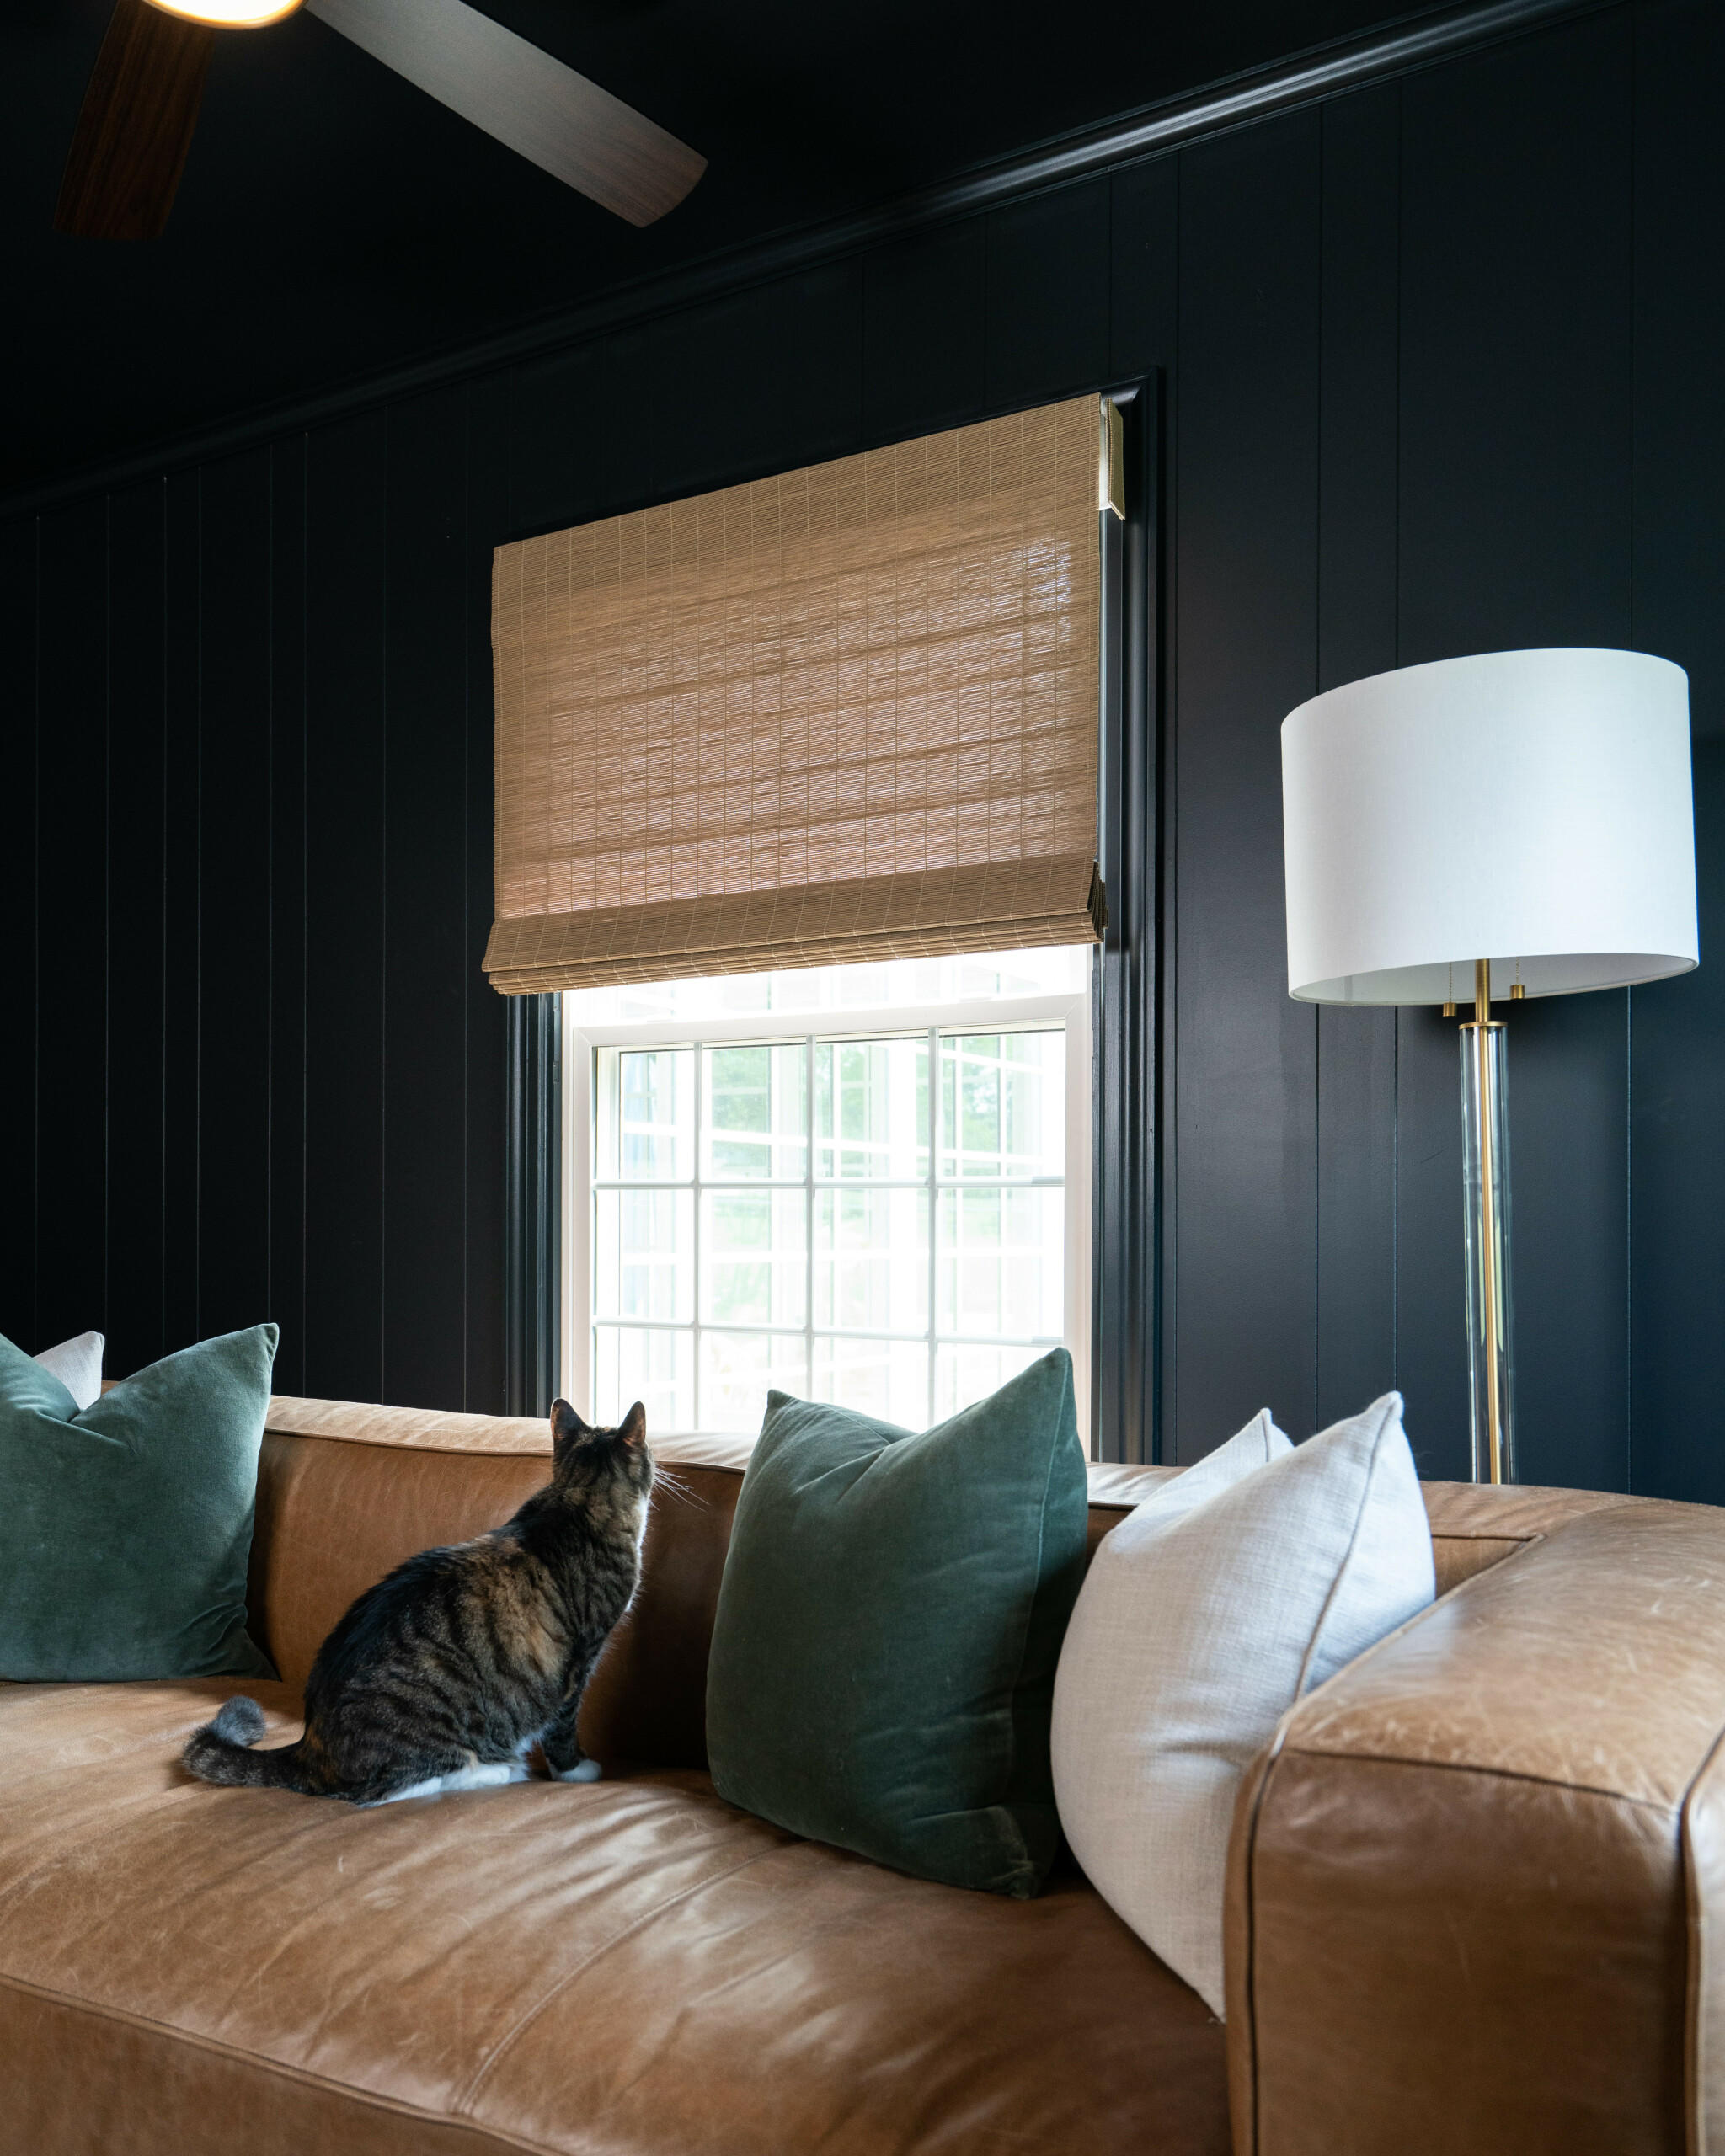 Budget Blinds of South East Calgary in Calgary: Pet Friendly Motorized Woven Wood Shades